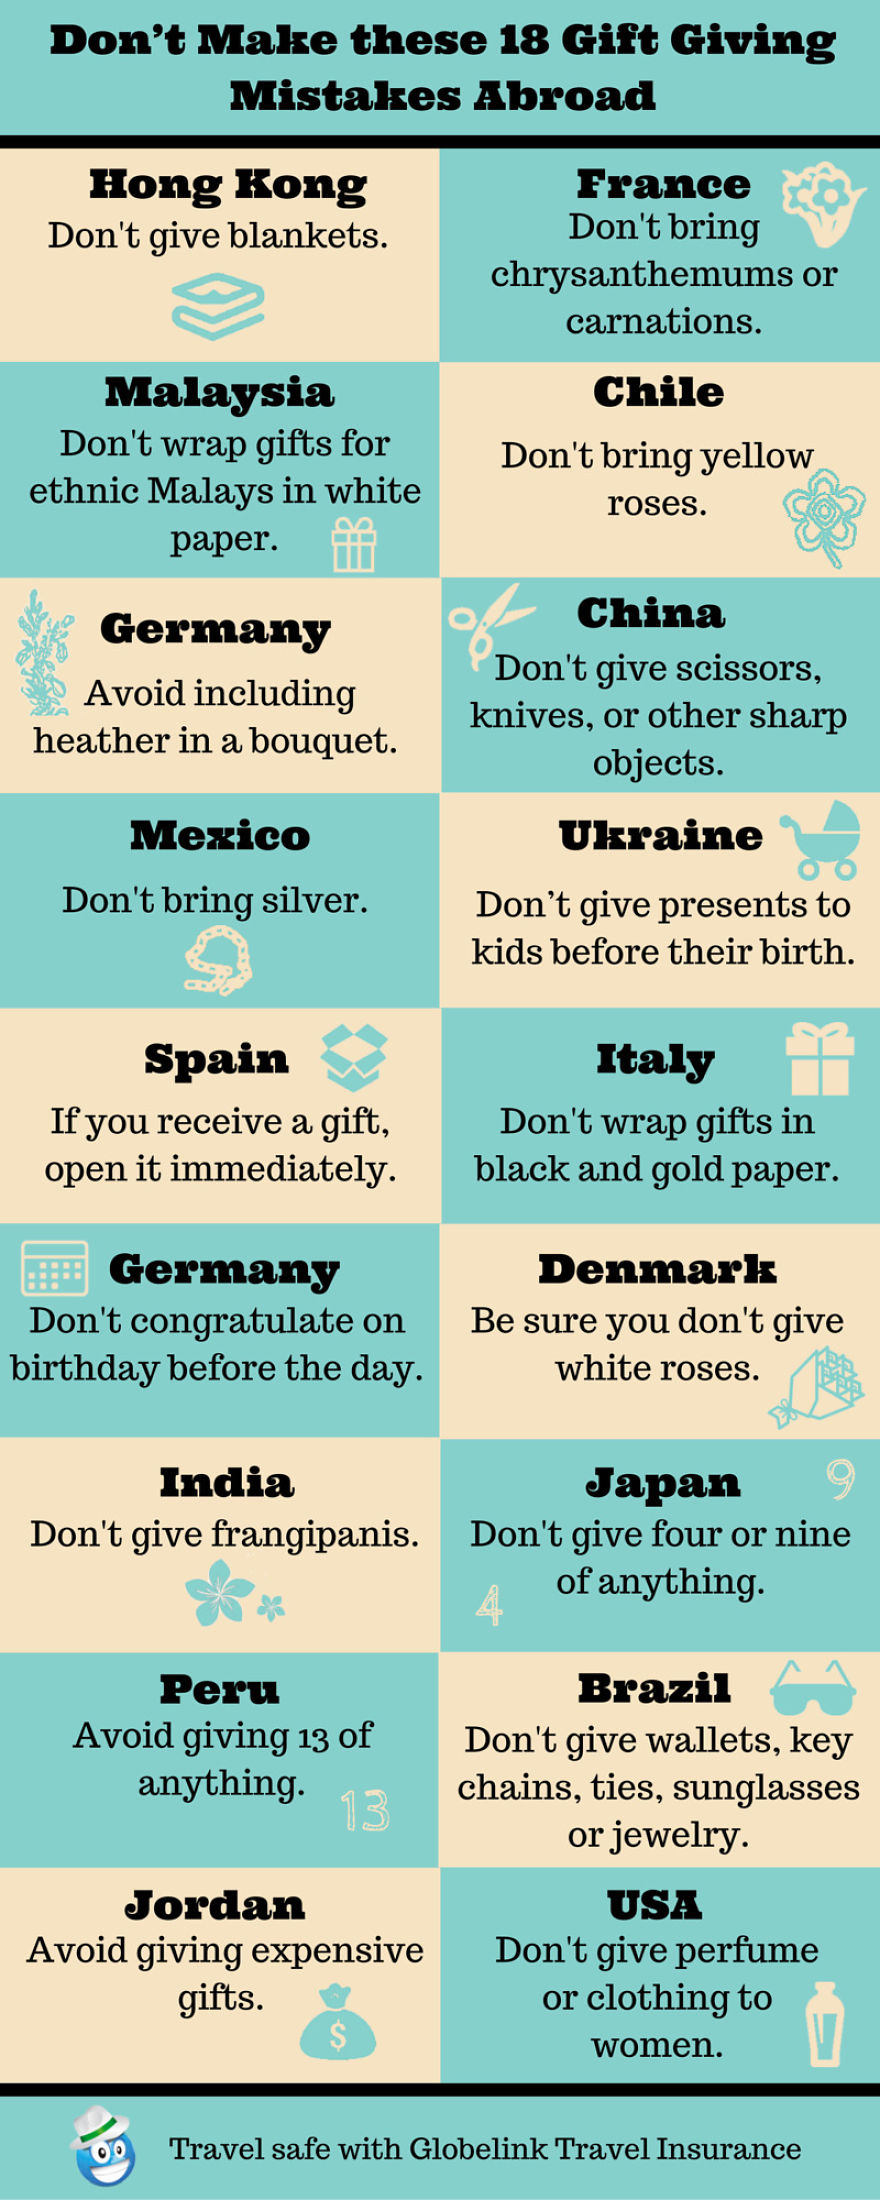 Don't Make These 18 Gift Giving Mistakes Abroad